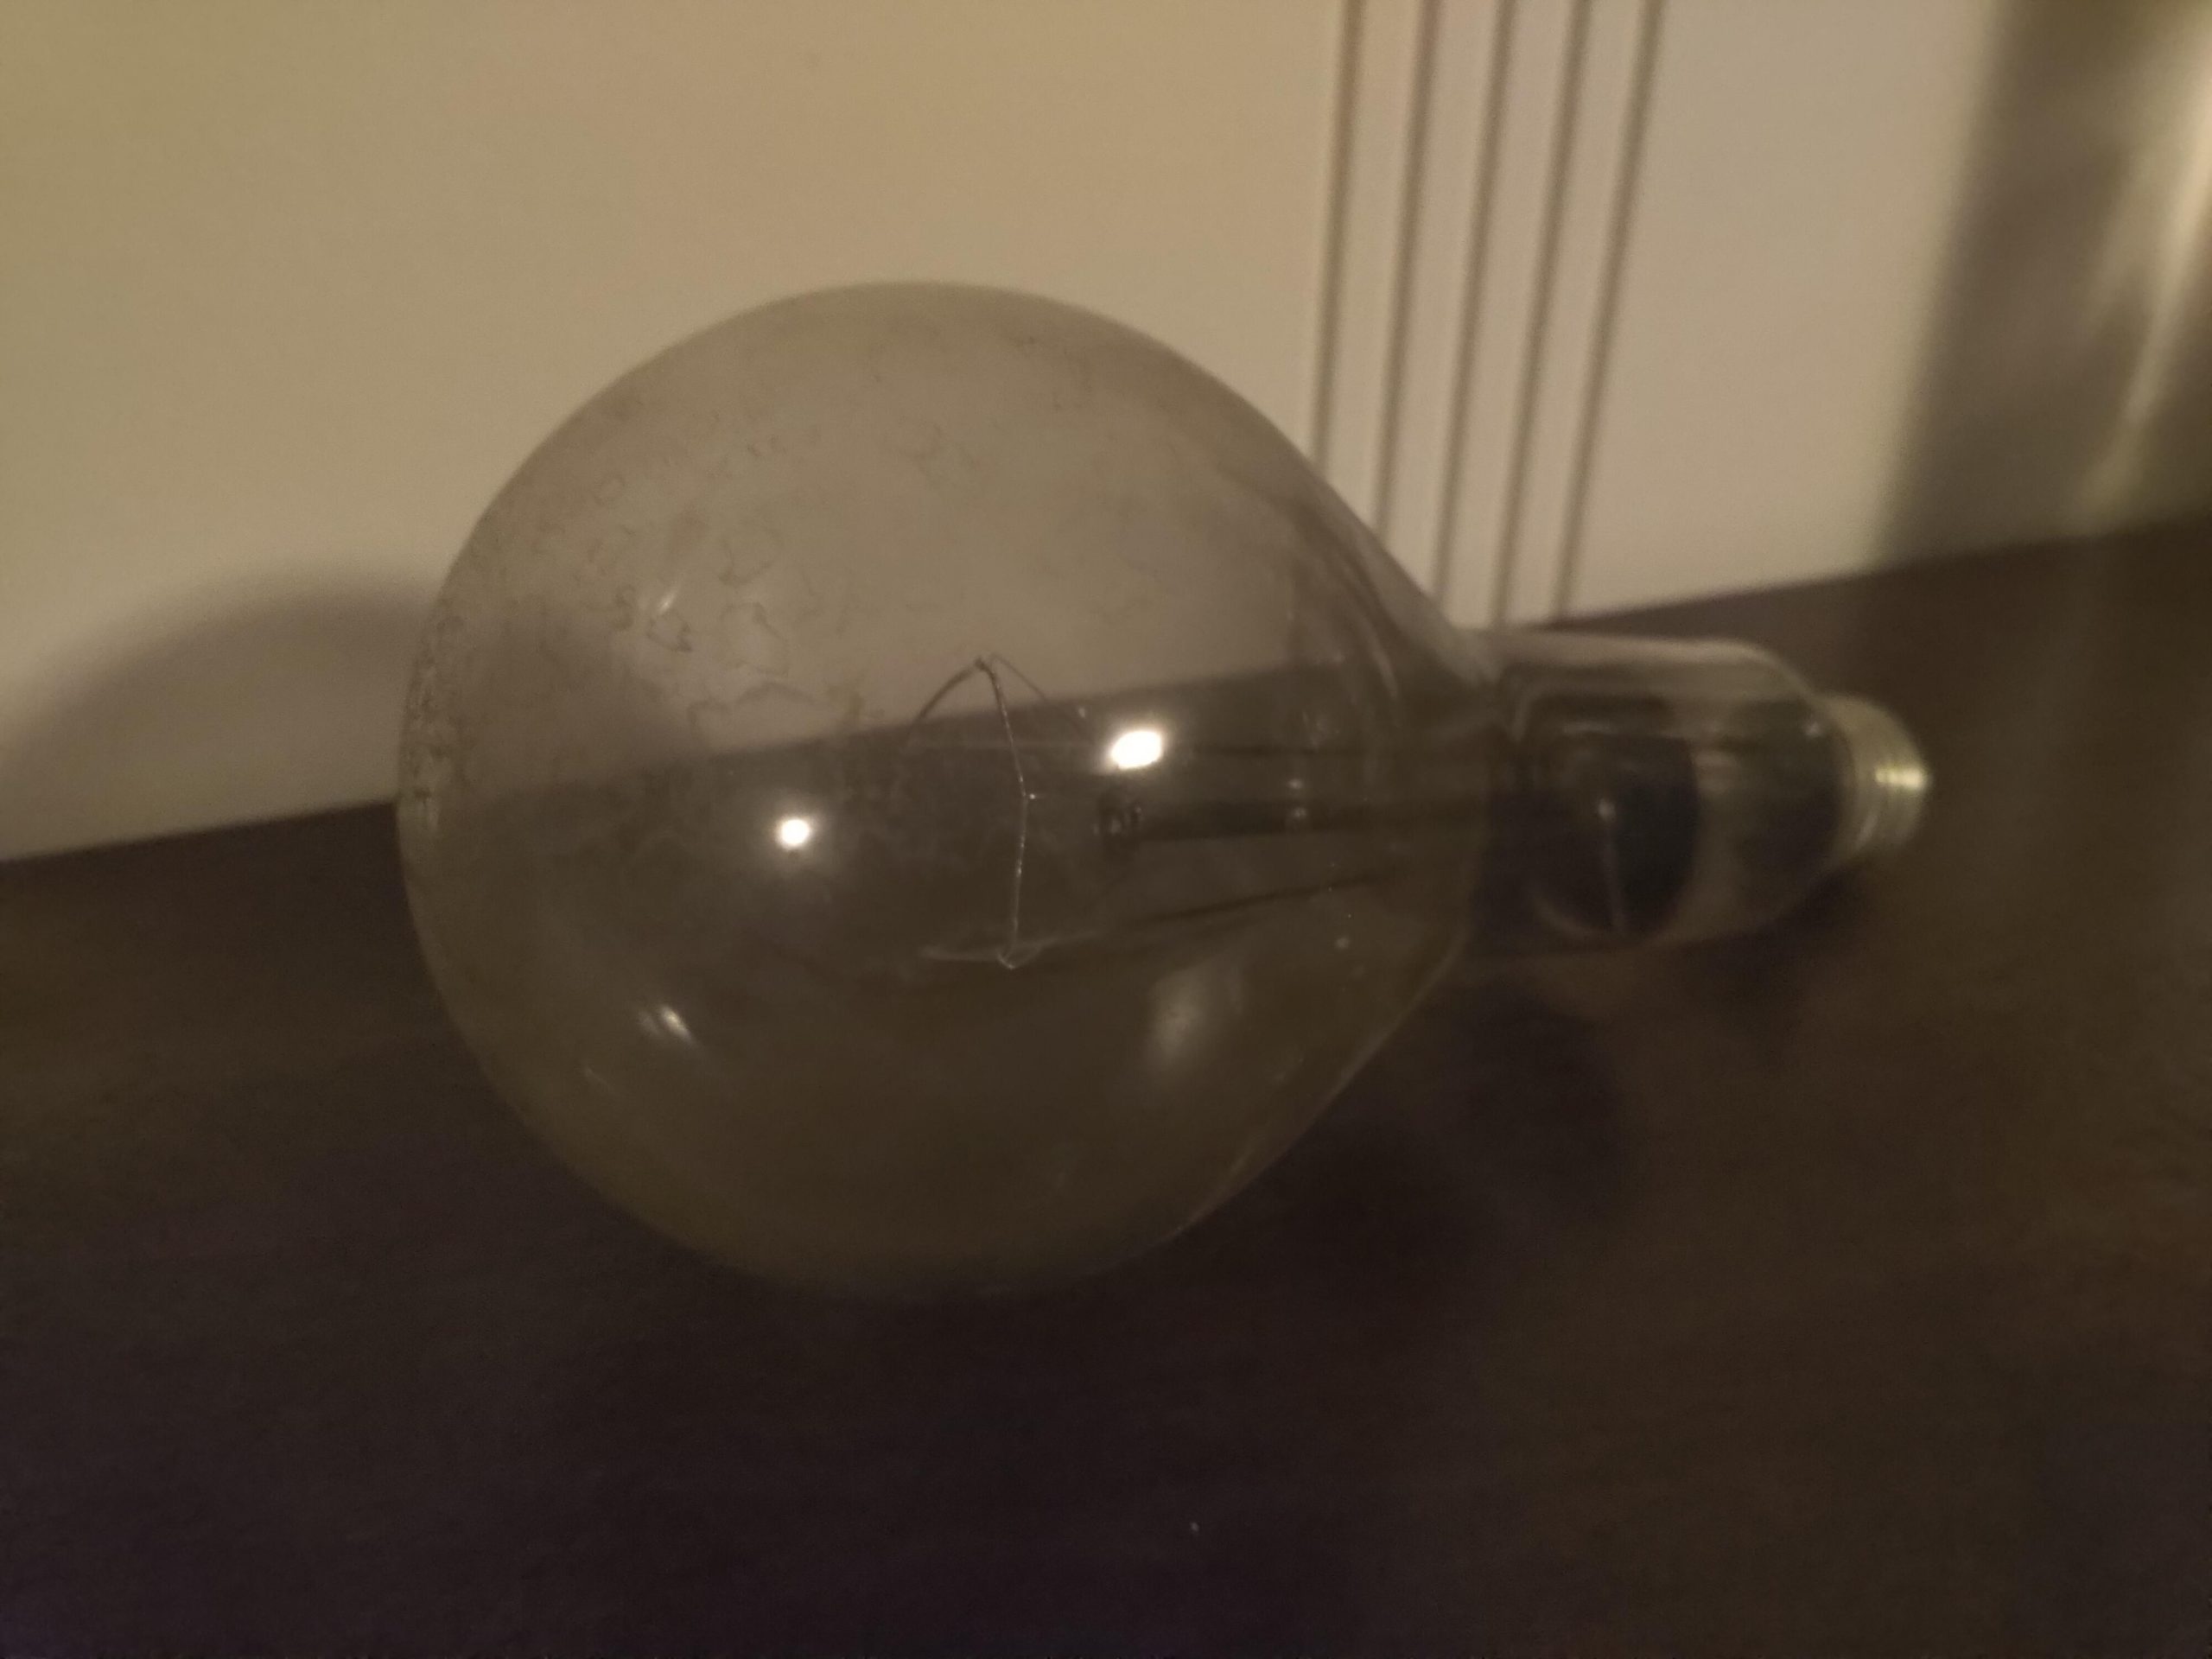 An old-looking lightbulb that has burned out, sitting on a table, collecting dust.